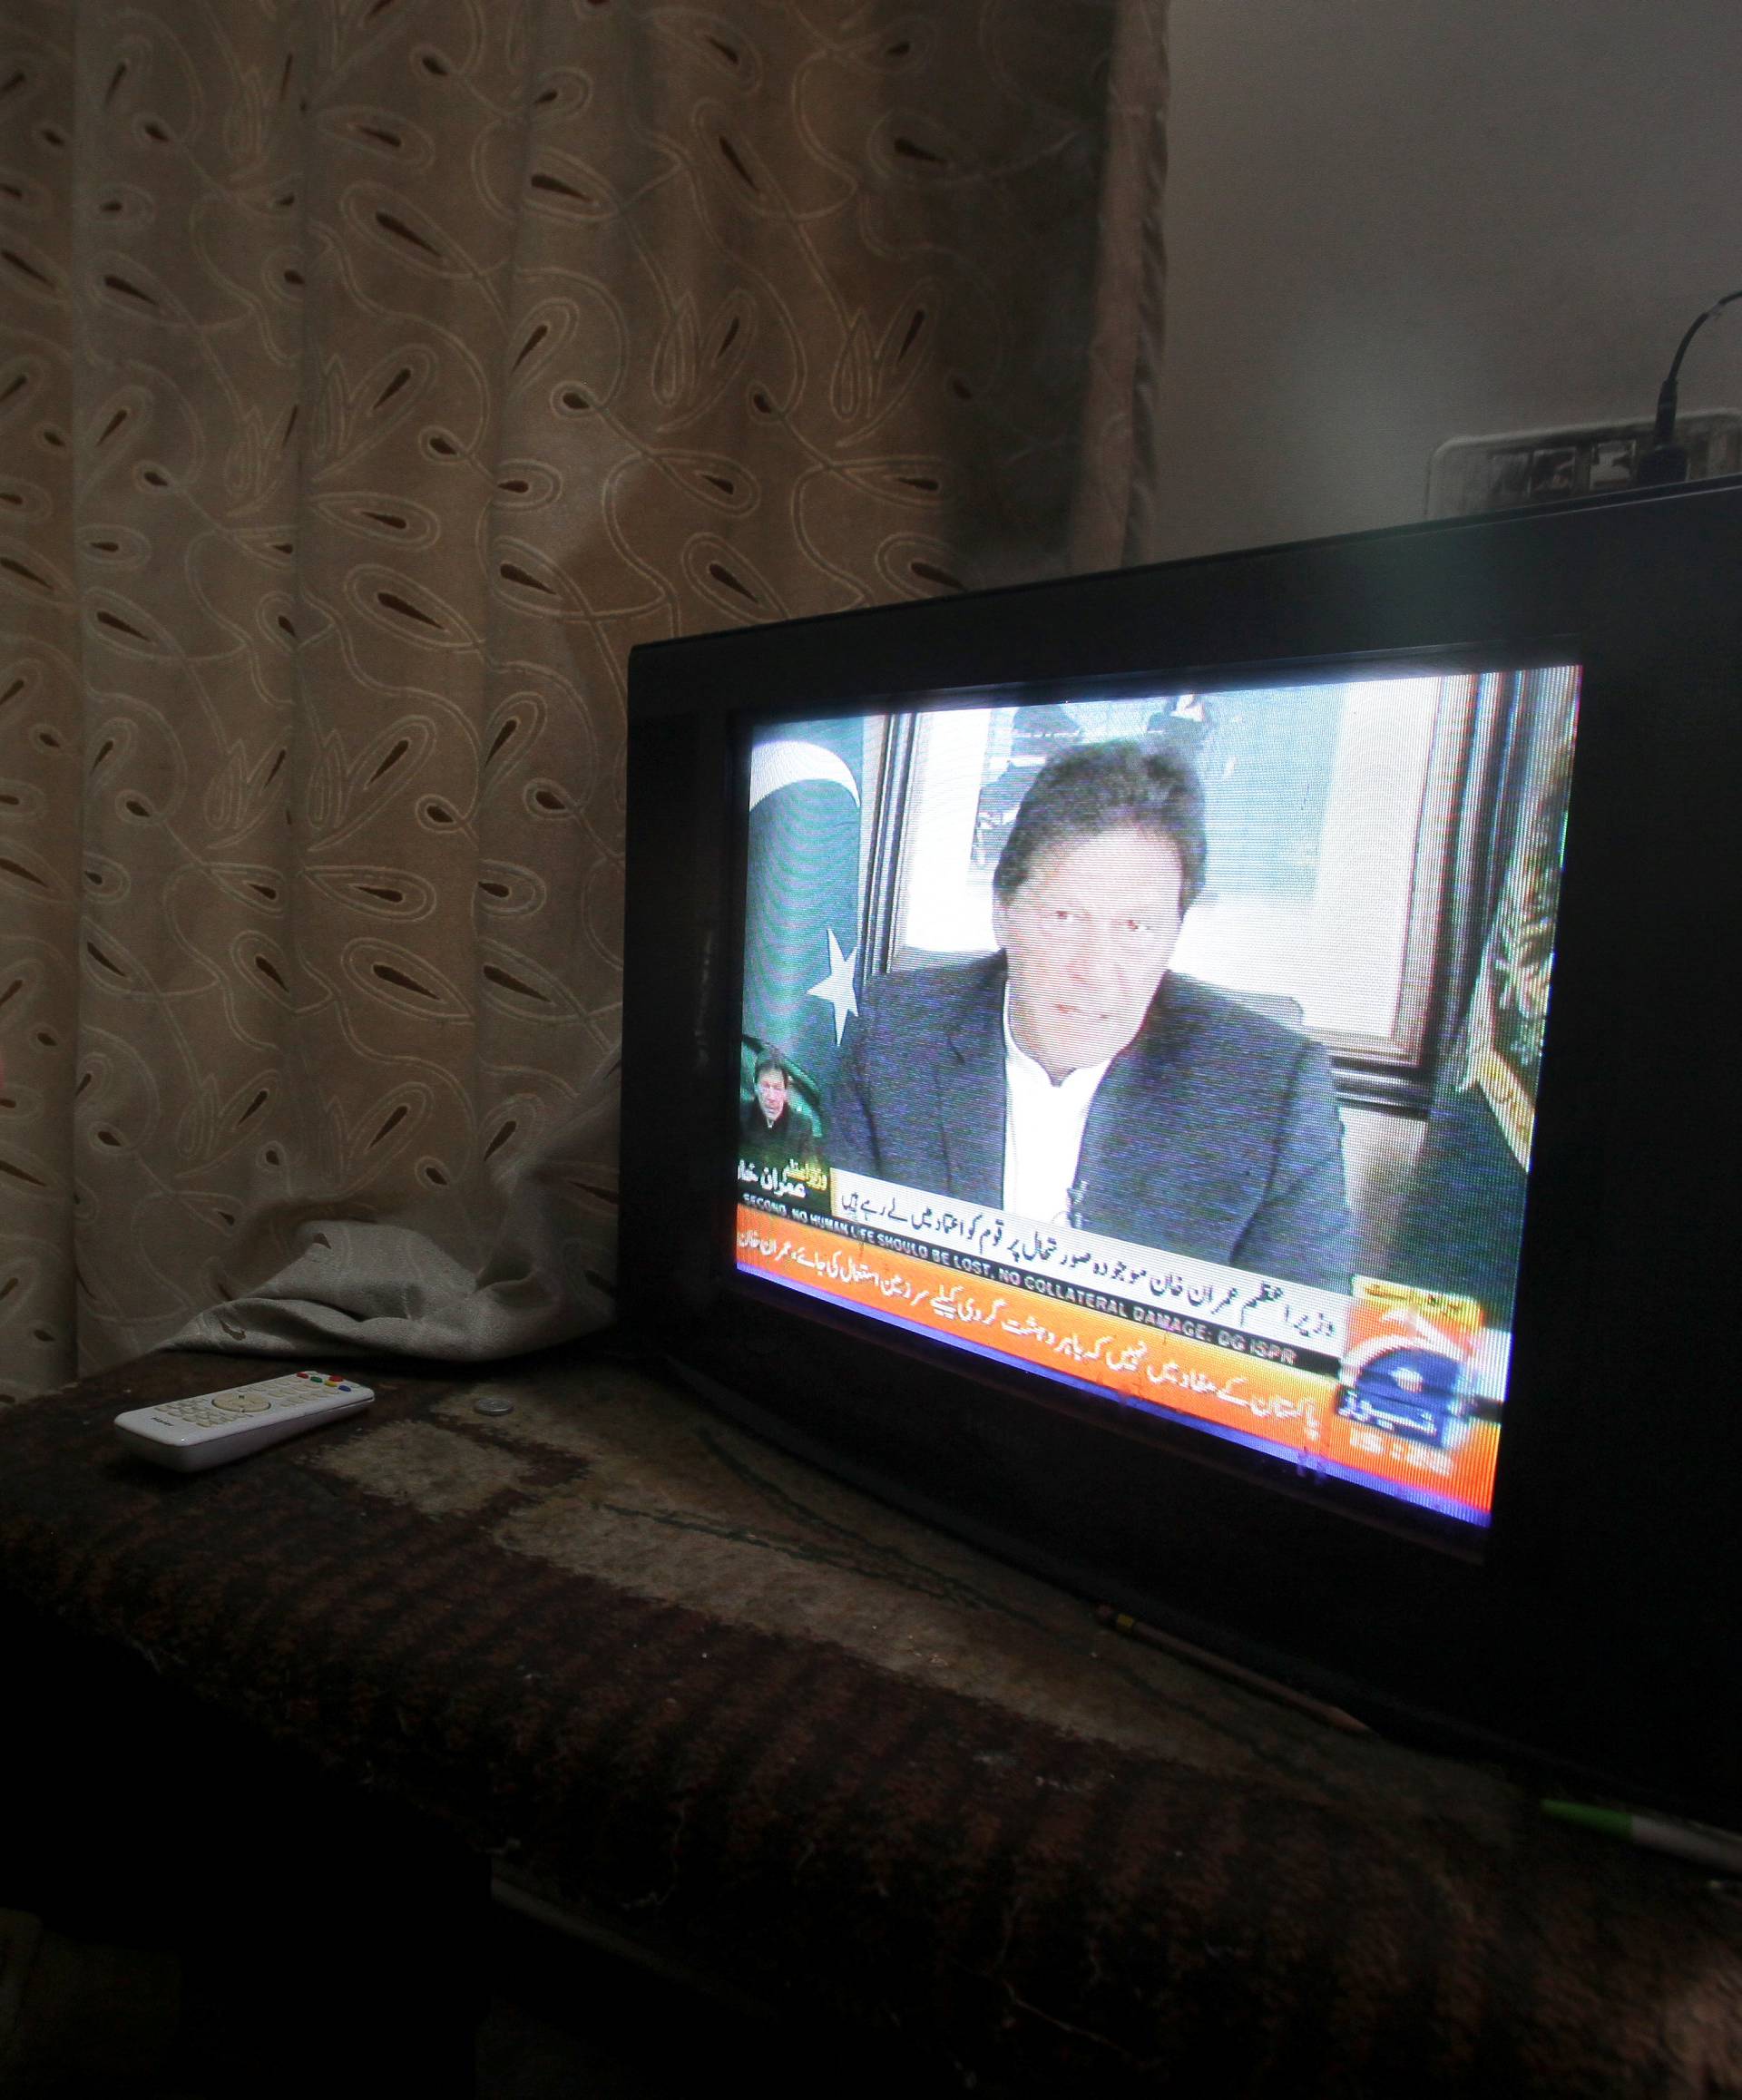 A man watches the speech of the Pakistani Prime Minister Imran Khan, after Pakistan shot down two Indian planes, in Lahore